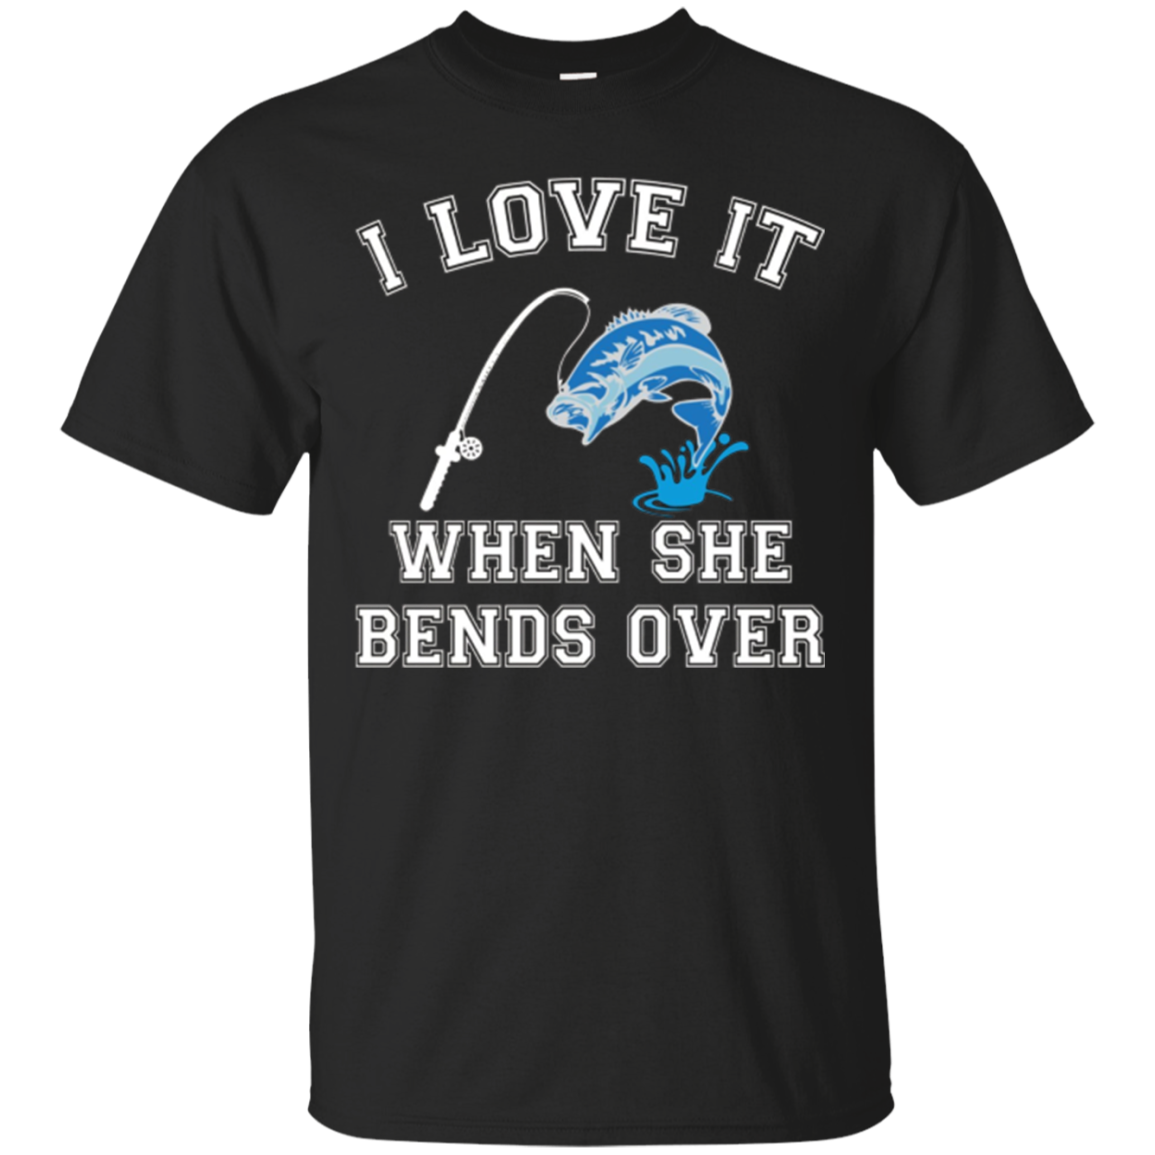 I Love It When She Bends Over - Funny Fishing Shirt